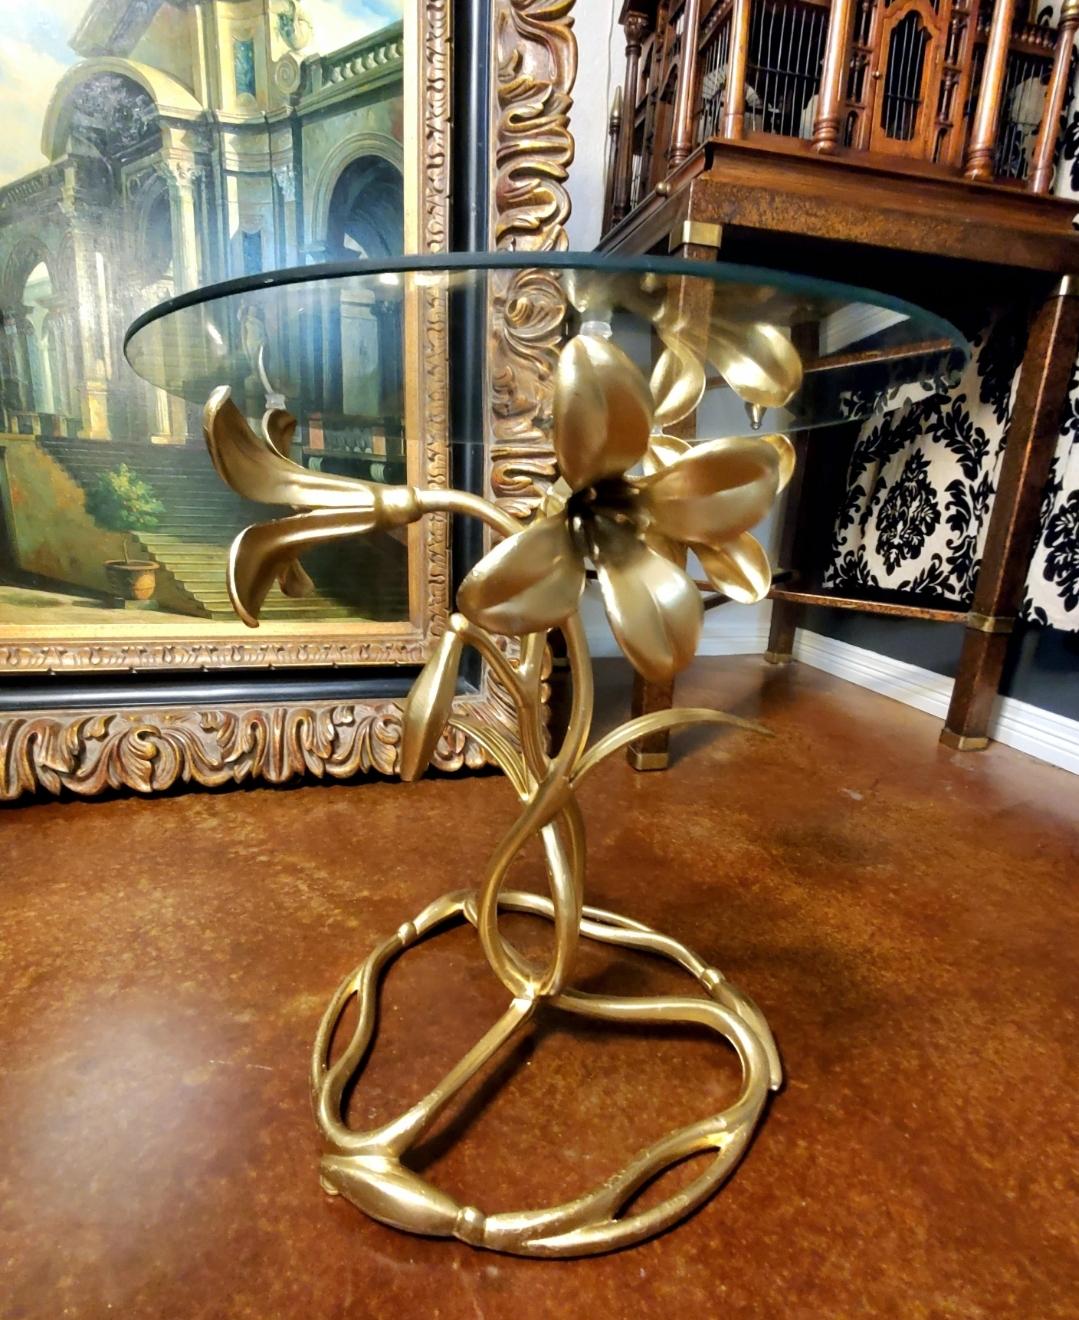 Art Nouveau and Arthur Court inspired cast aluminum side table, with an aged gilt finish. Base is comprised of three flowering lilies with intertwined stems in a figure eight pattern, finishing with a circular three sectioned base of stems and